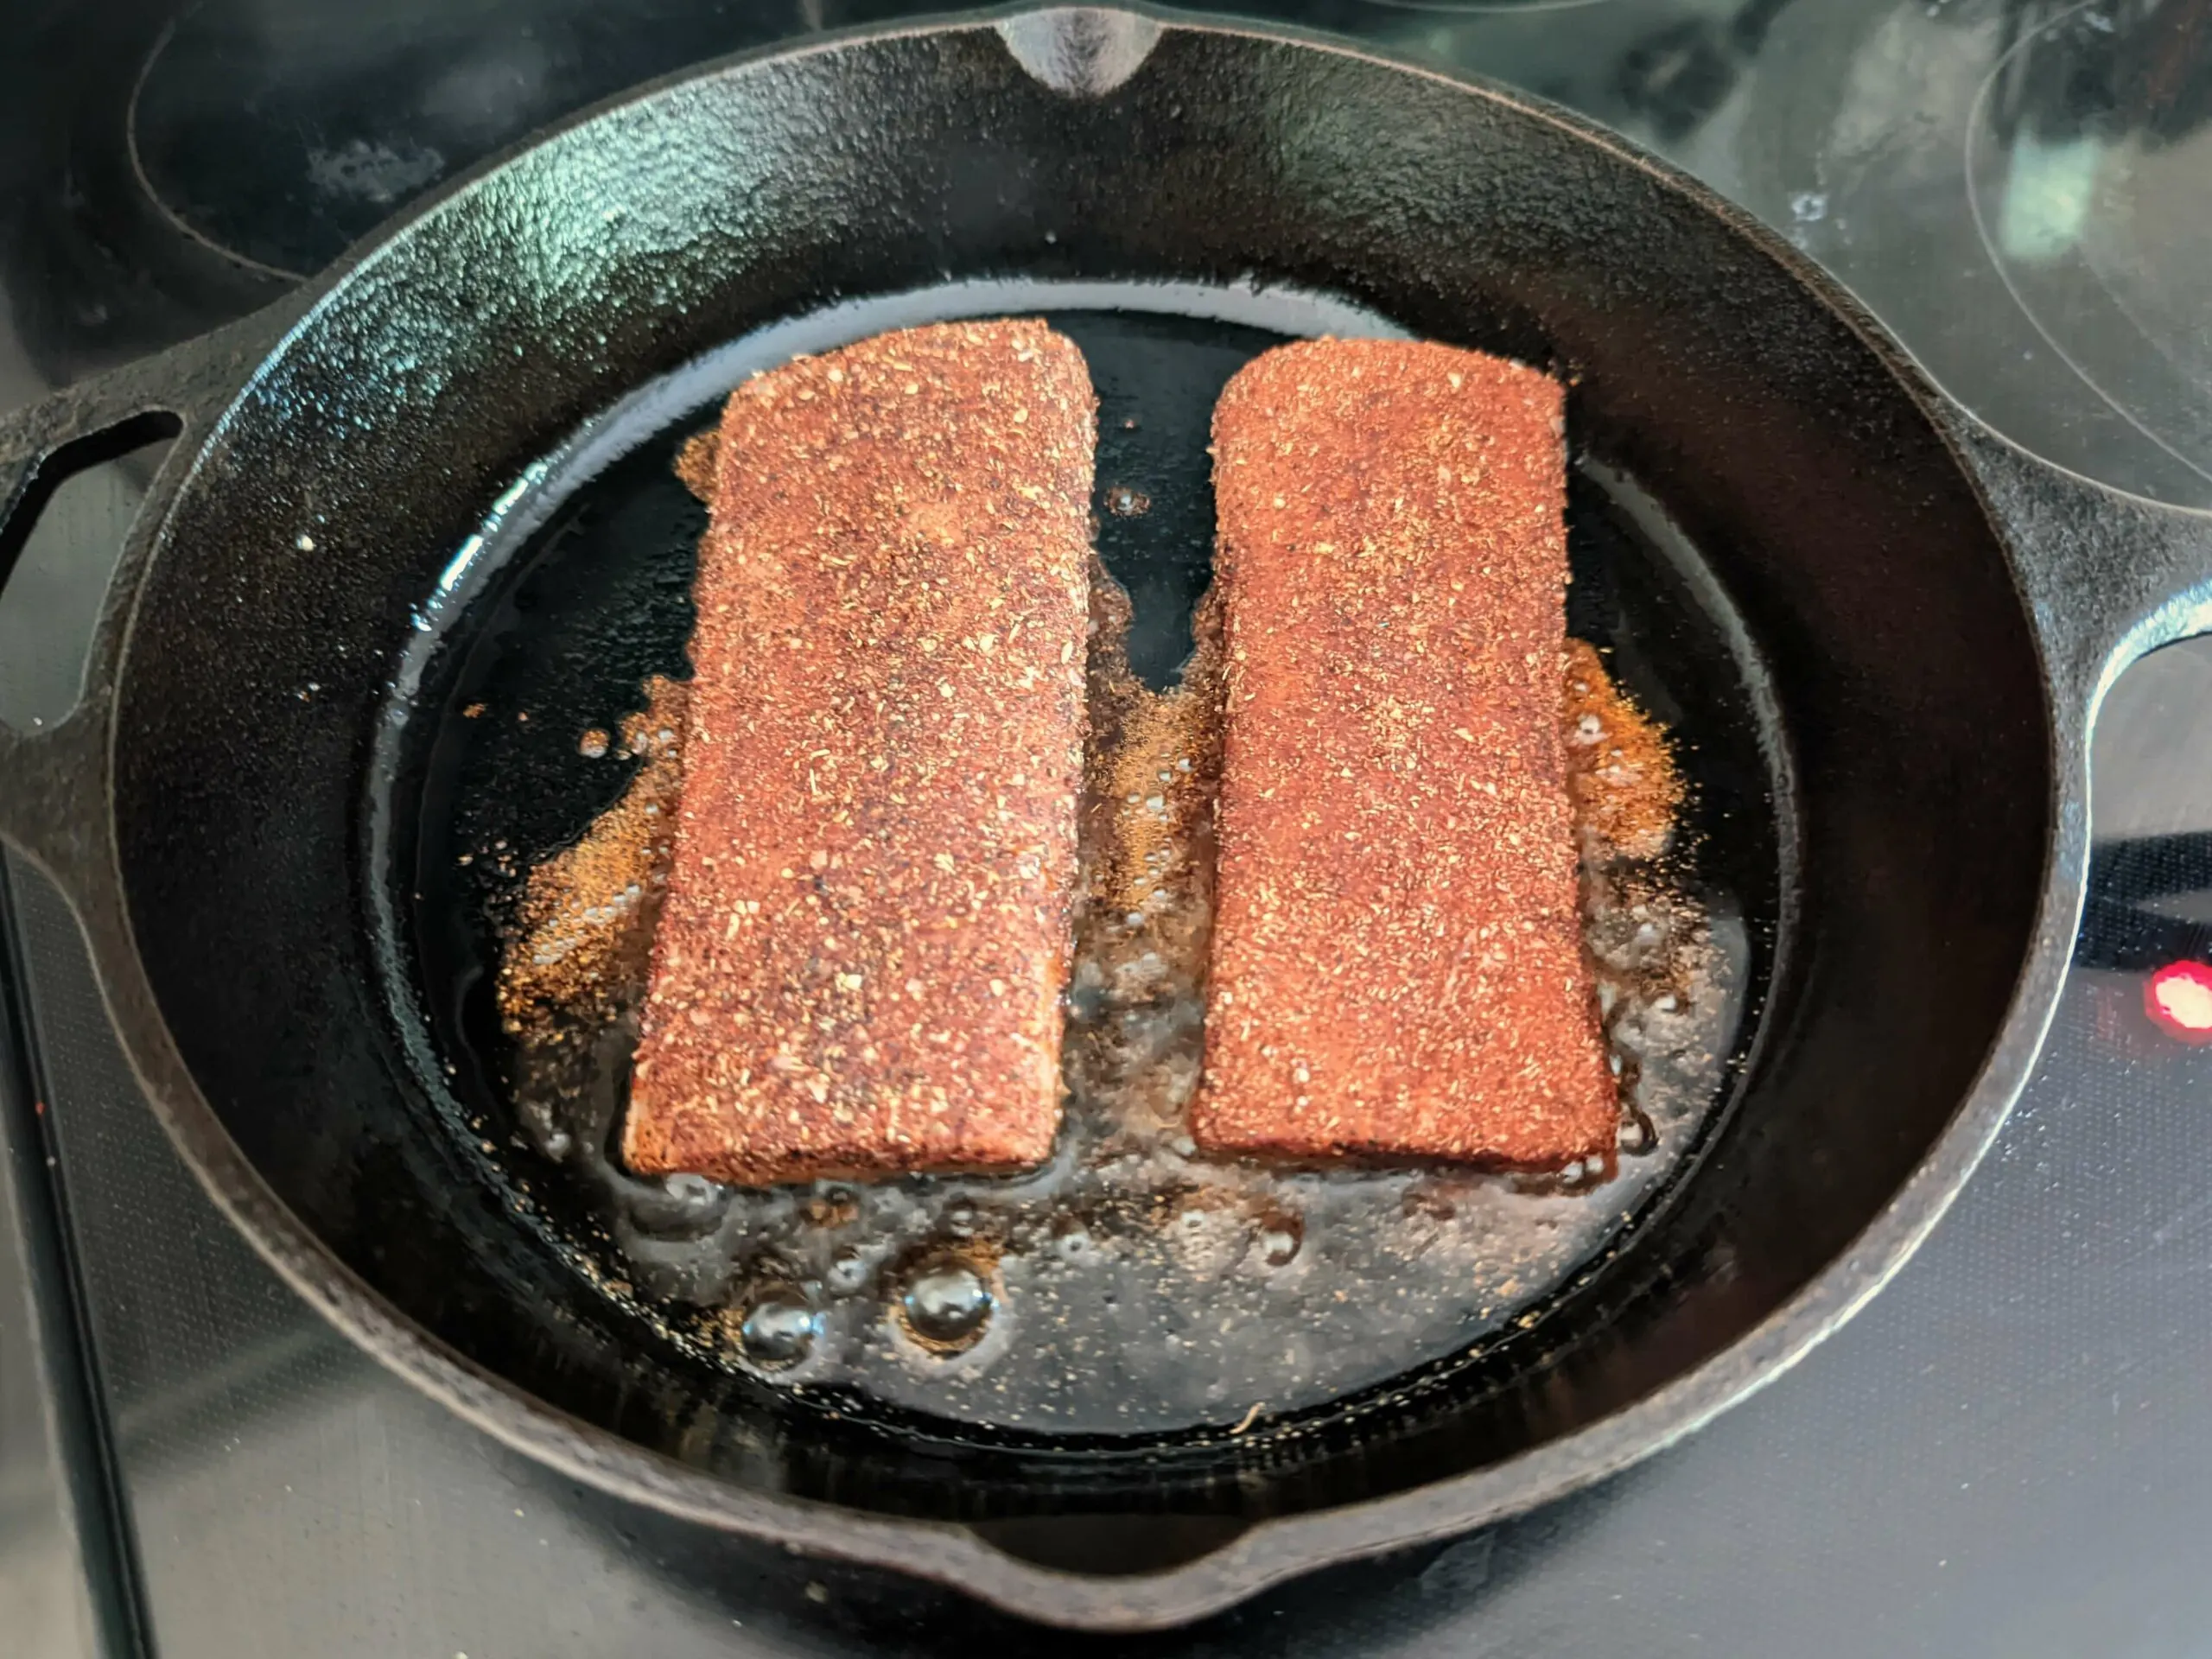 Cook the fillet in a well heated pan for 3 minutes on one side.